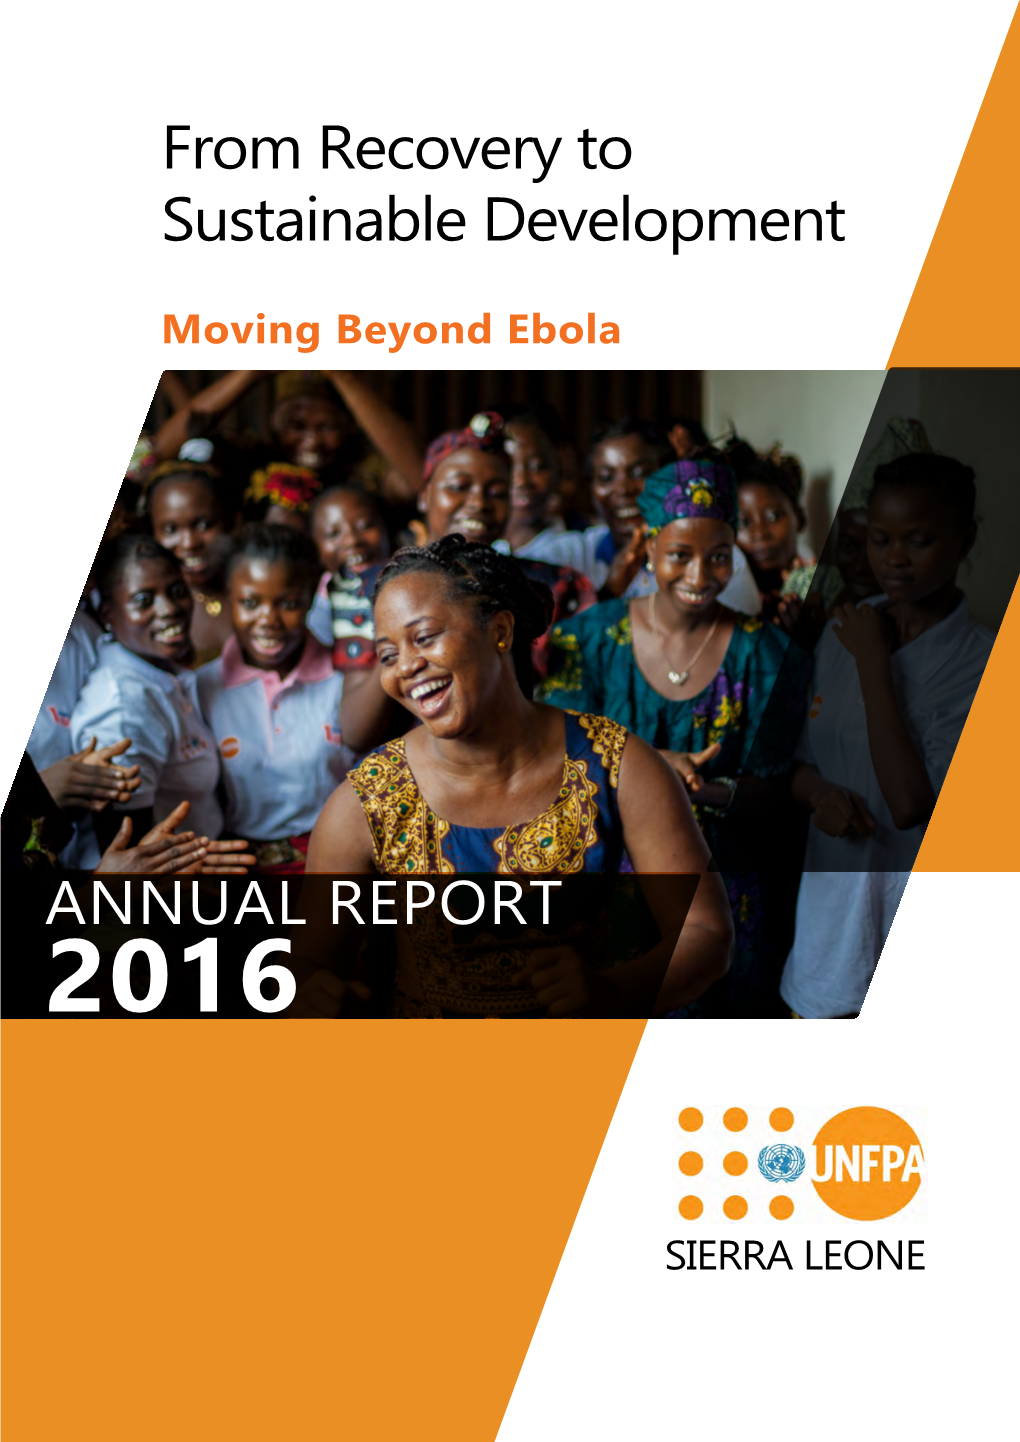 From Recovery to Sustainable Development ANNUAL REPORT